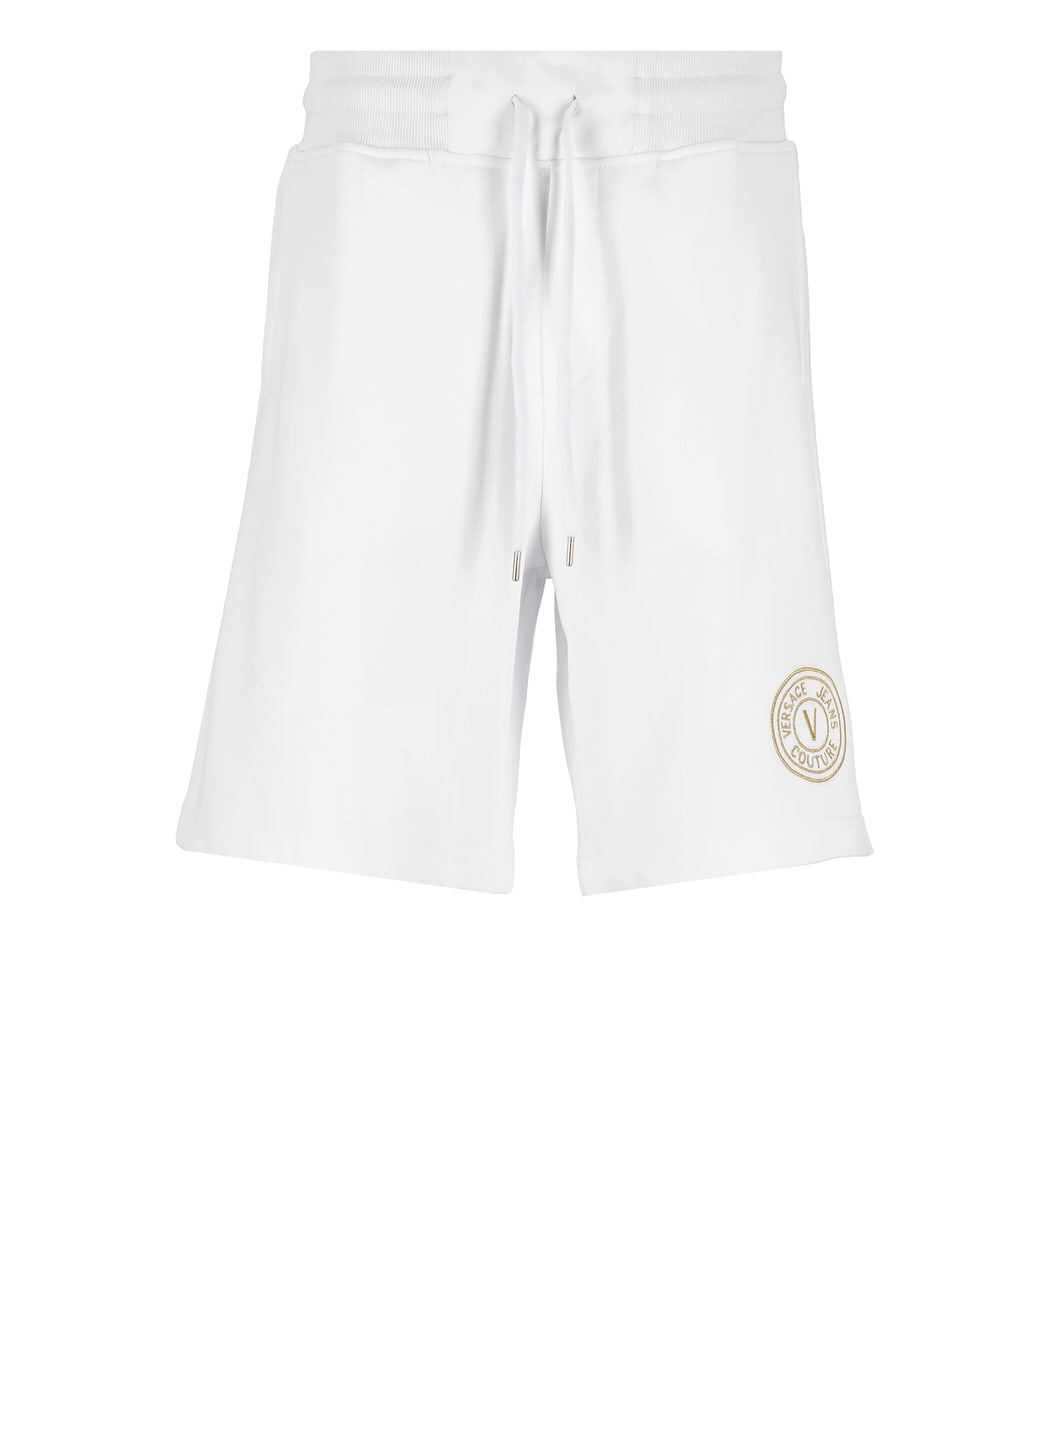 VERSACE JEANS COUTURE BERMUDA SHORTS WITH VEMBLEM LOGO